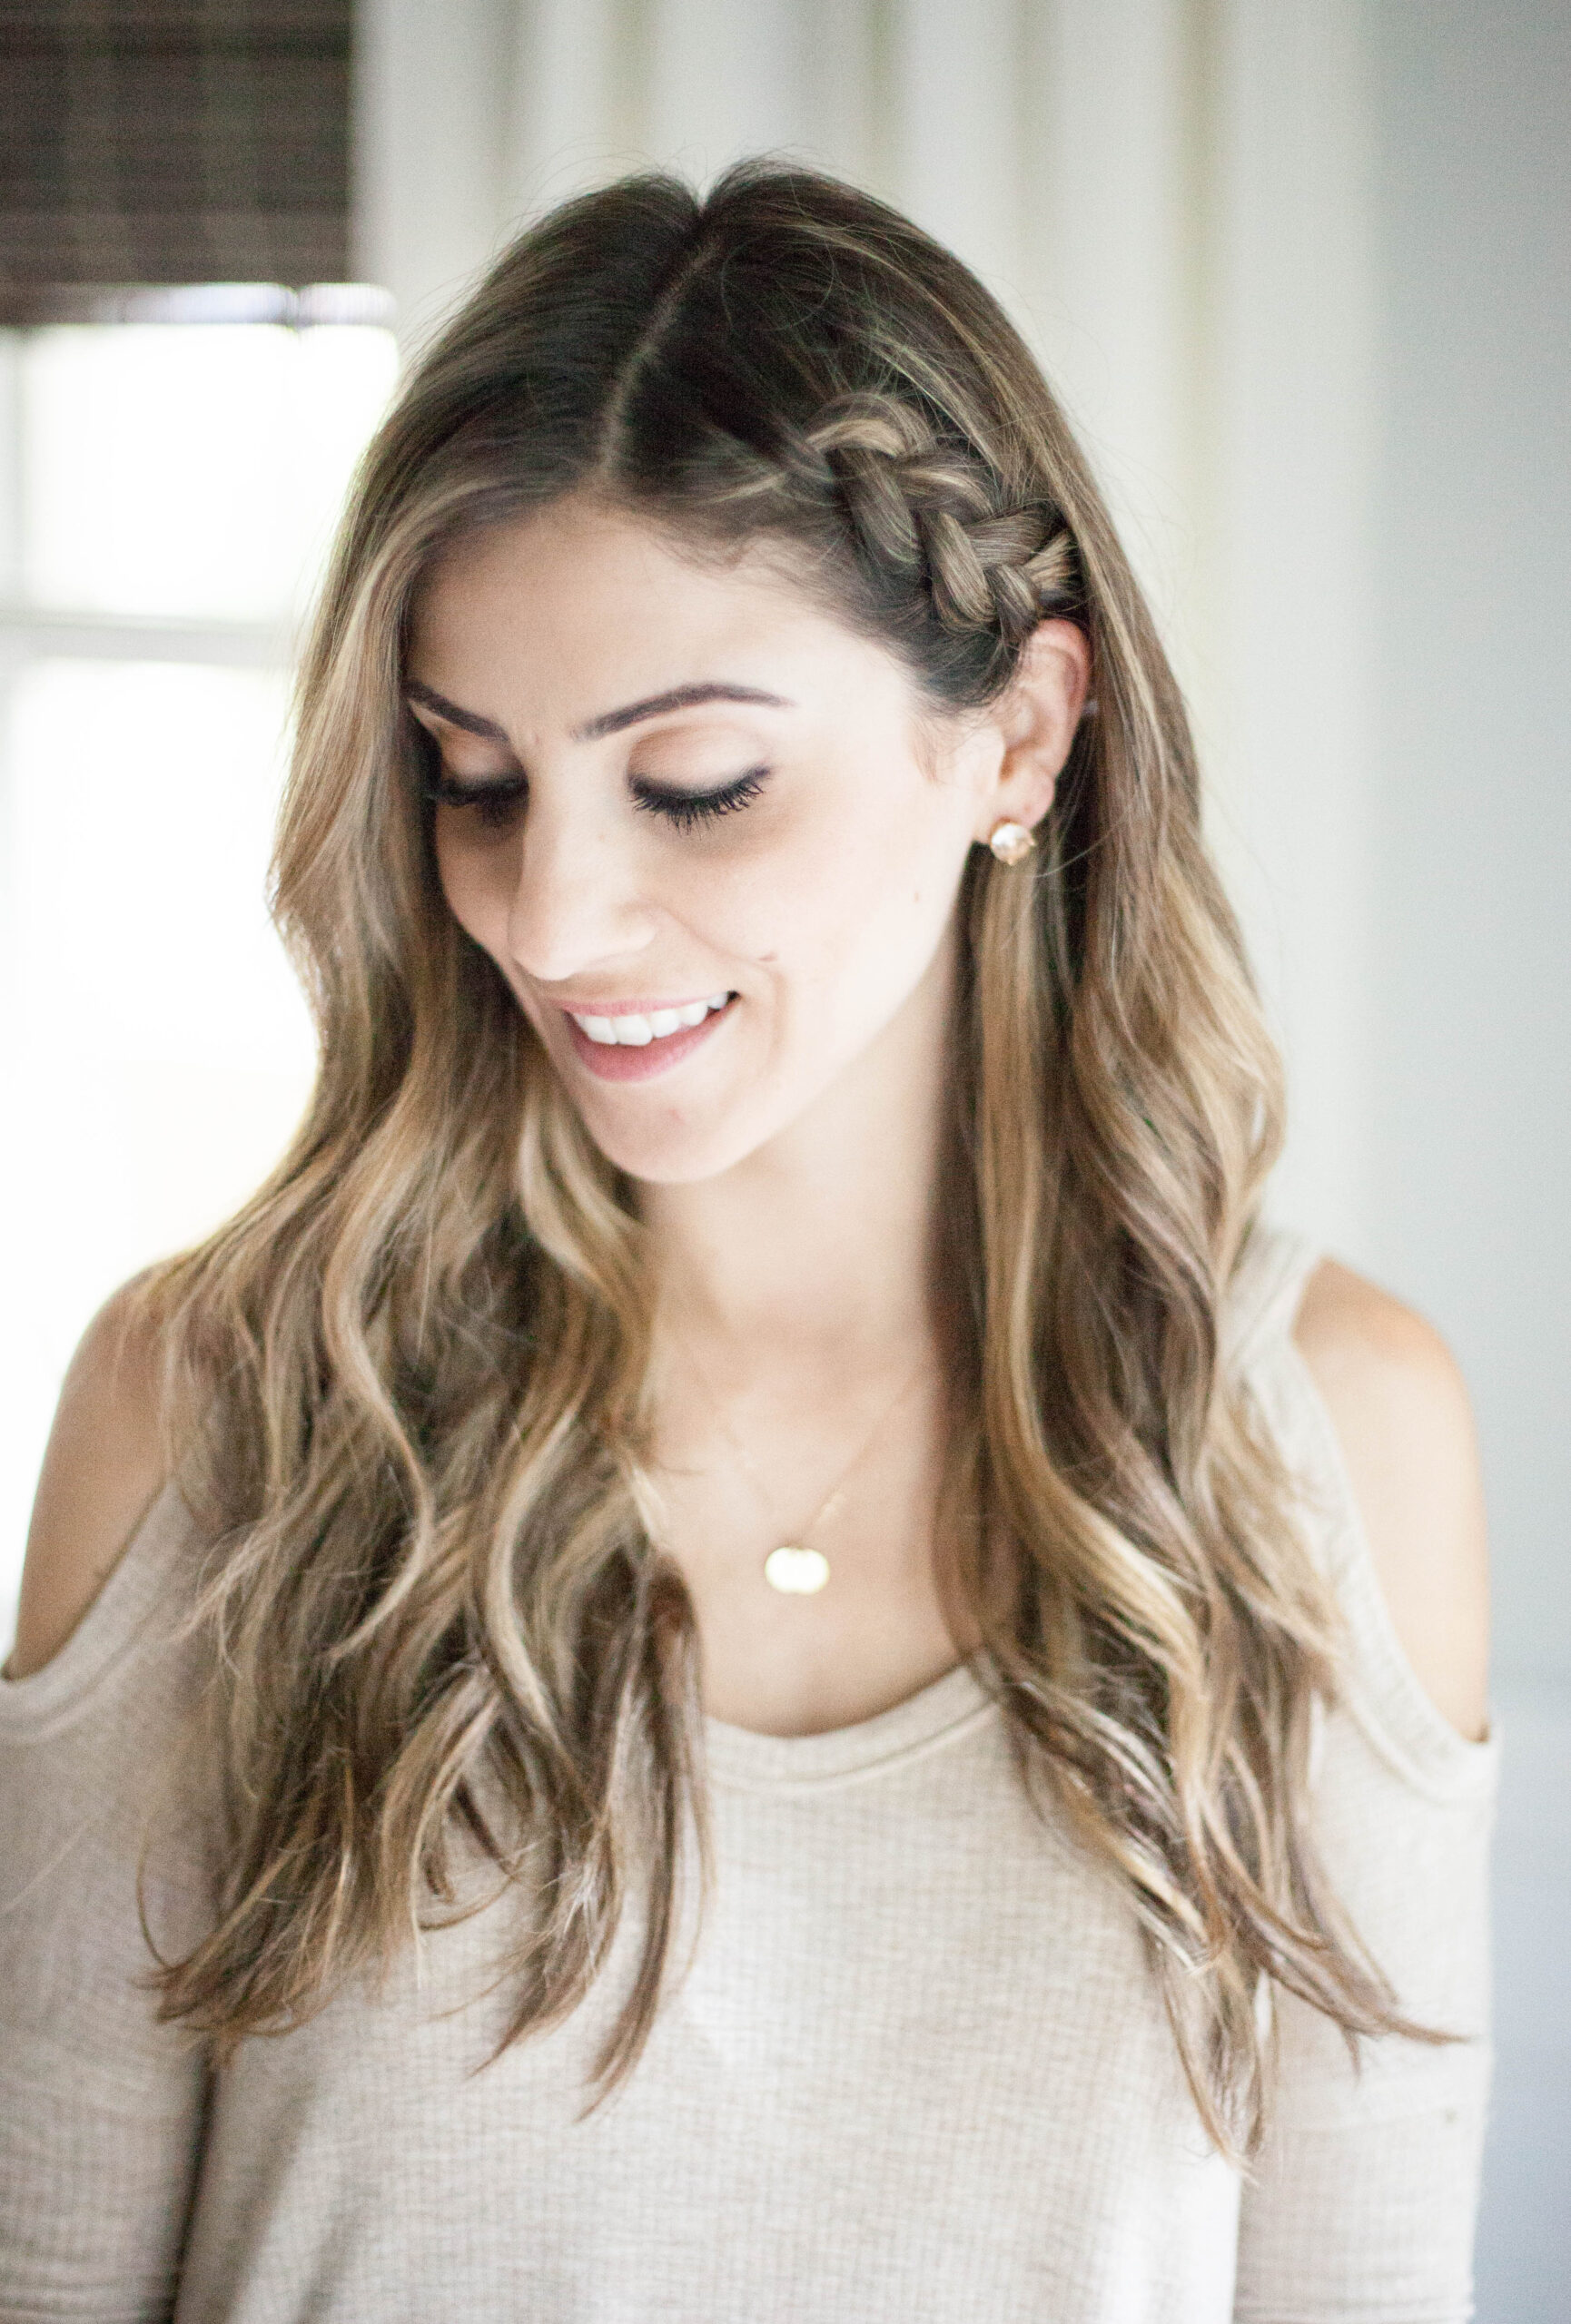 20 Stylish Side Braid Hairstyles For Long Hair